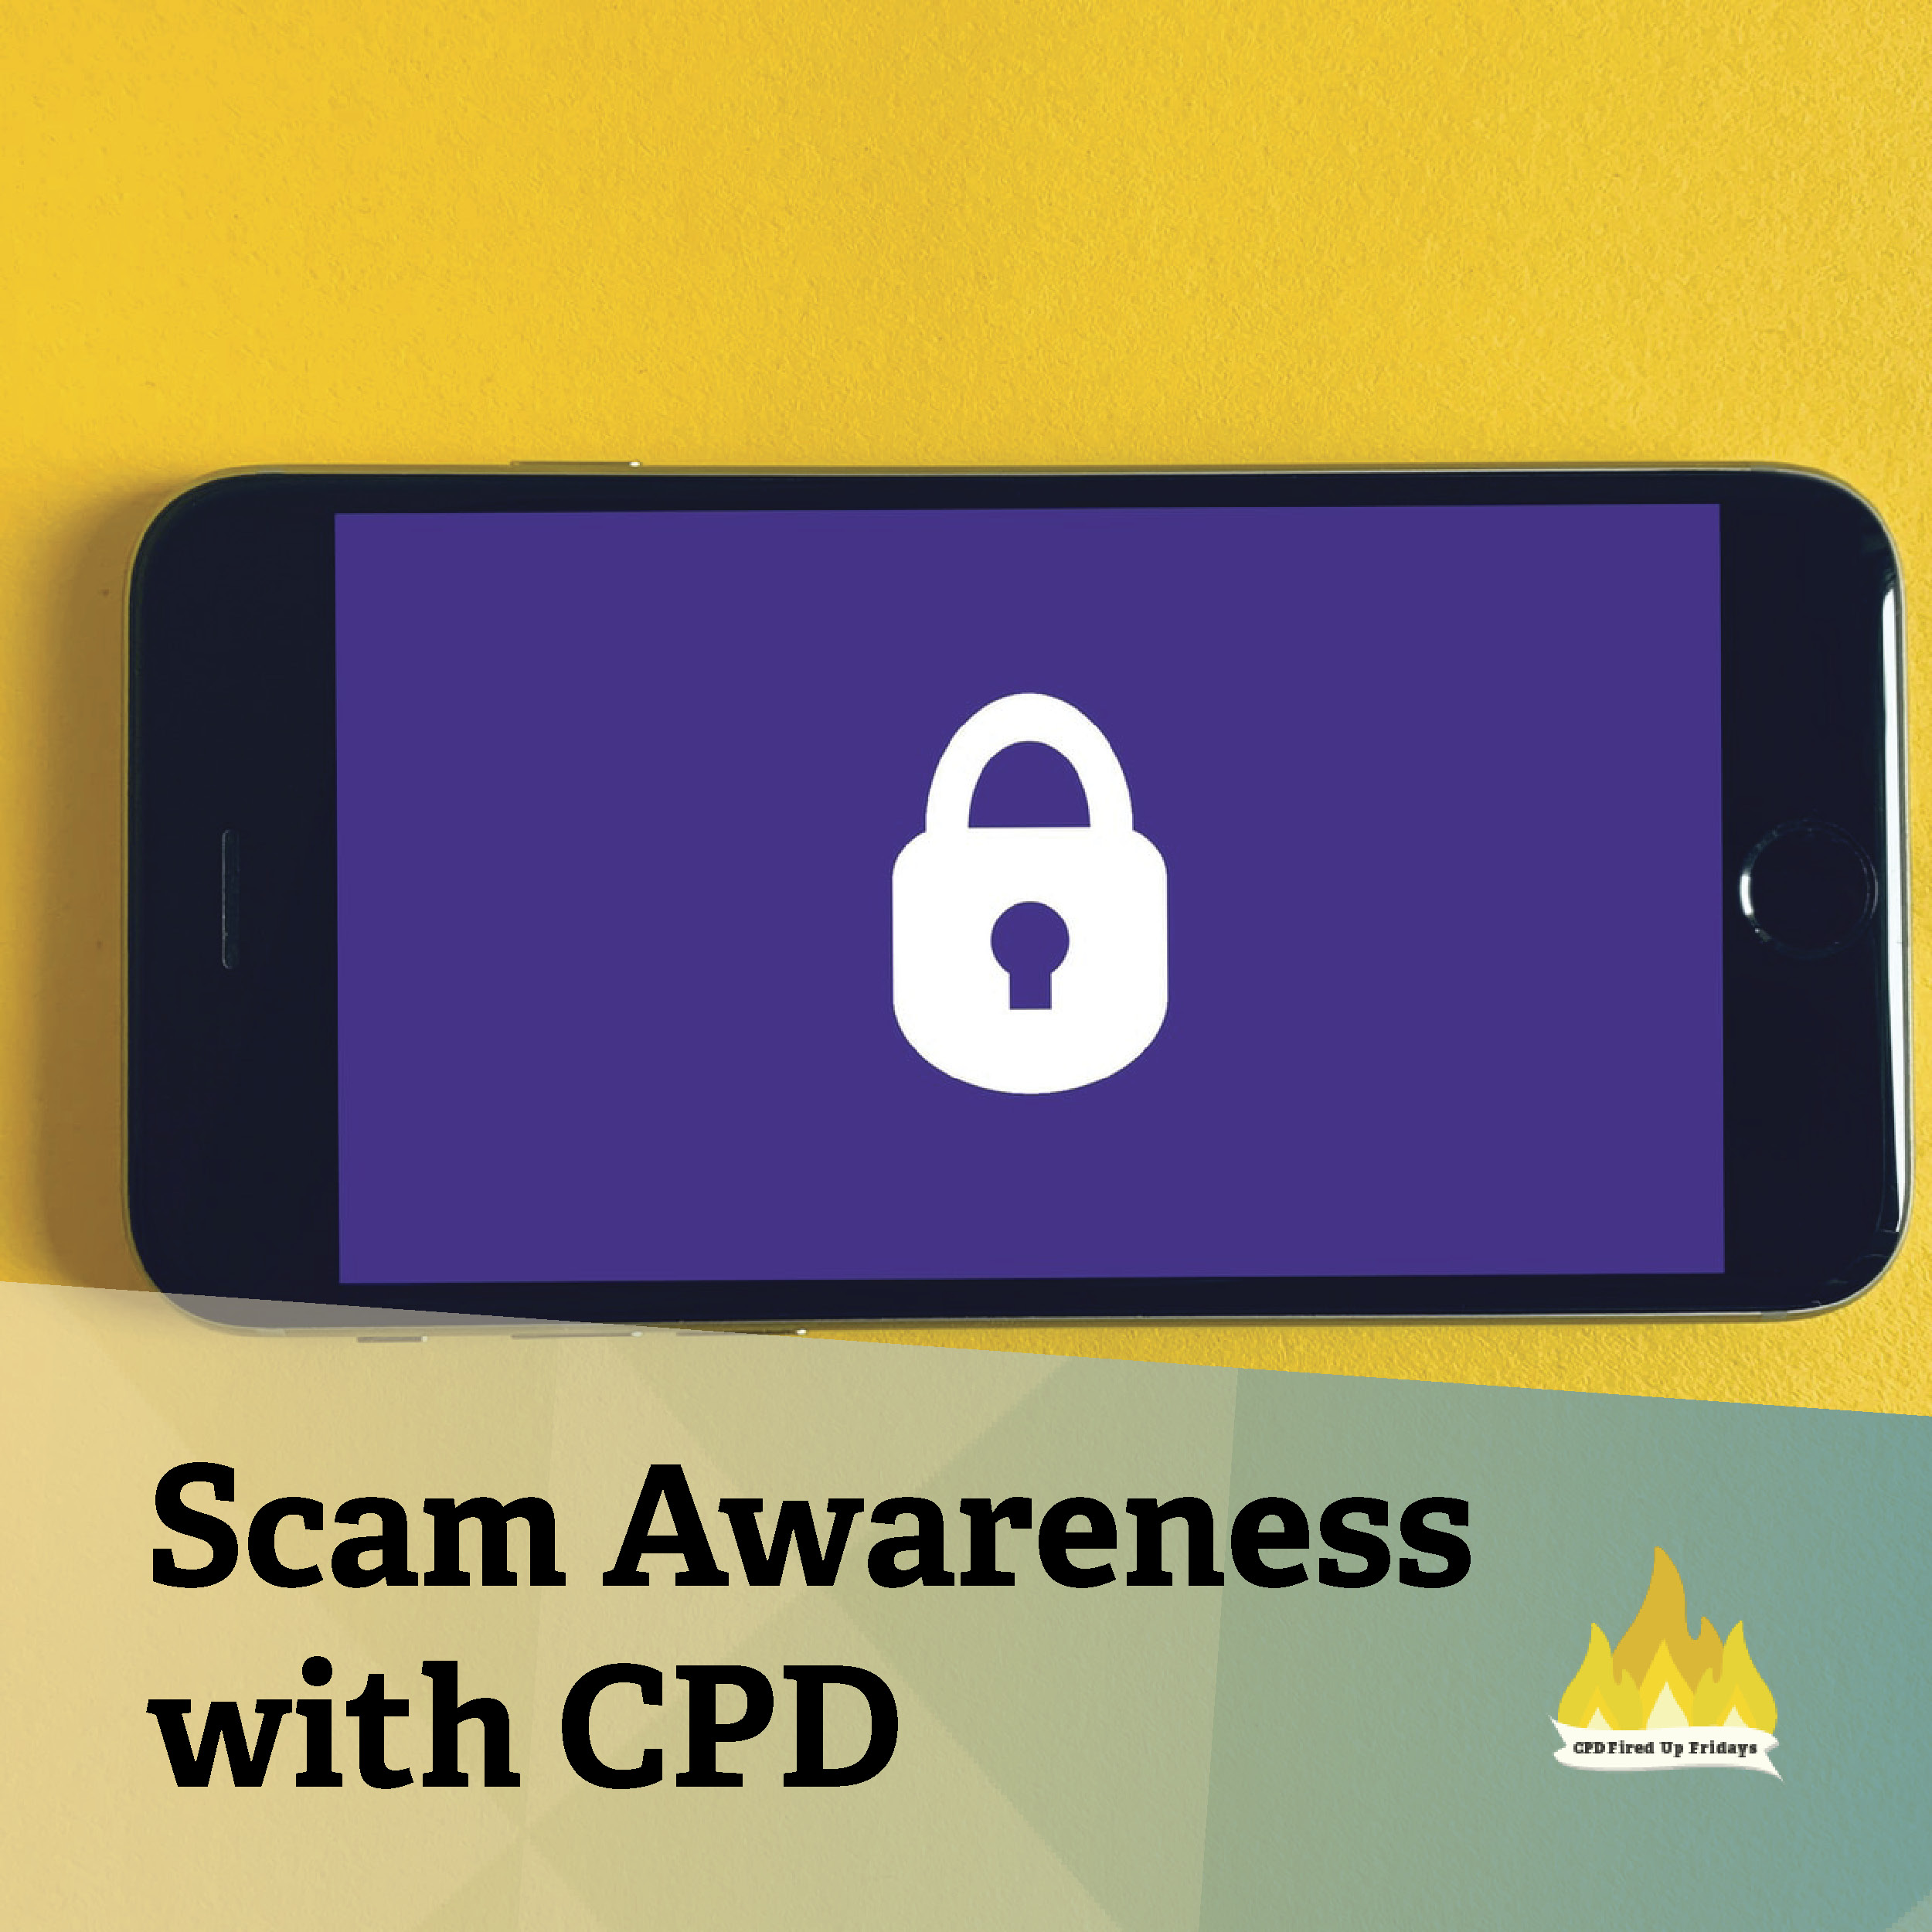 A black cellphone sits faceup on a yellow surface. The screen of the phone is purple with a white padlock symbol in the center. Underneath the image, text reads: 'Scam Awareness with CPD.'